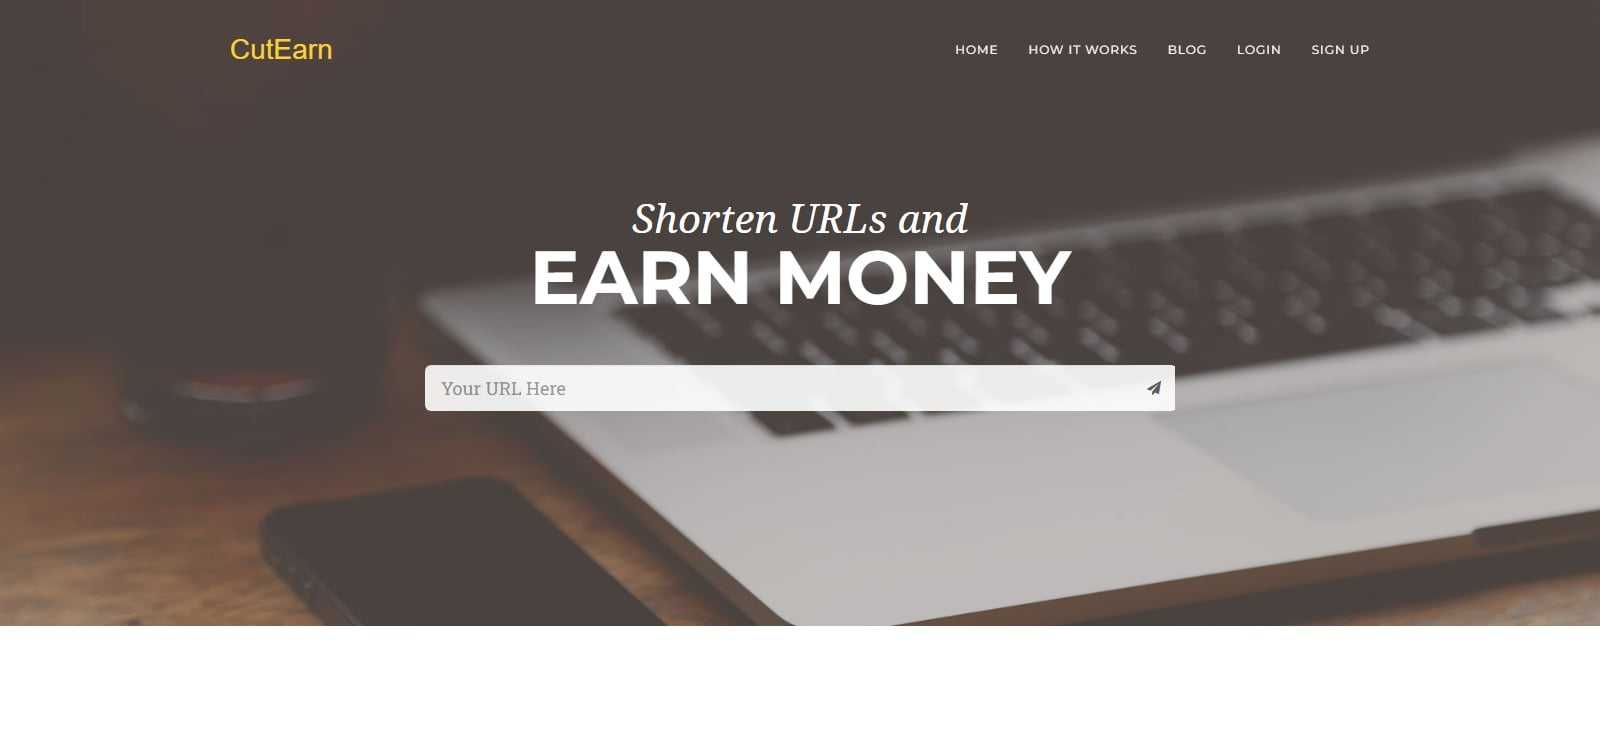 CutEarn Affiliates Program Review: Up to $25 per 1000 Views